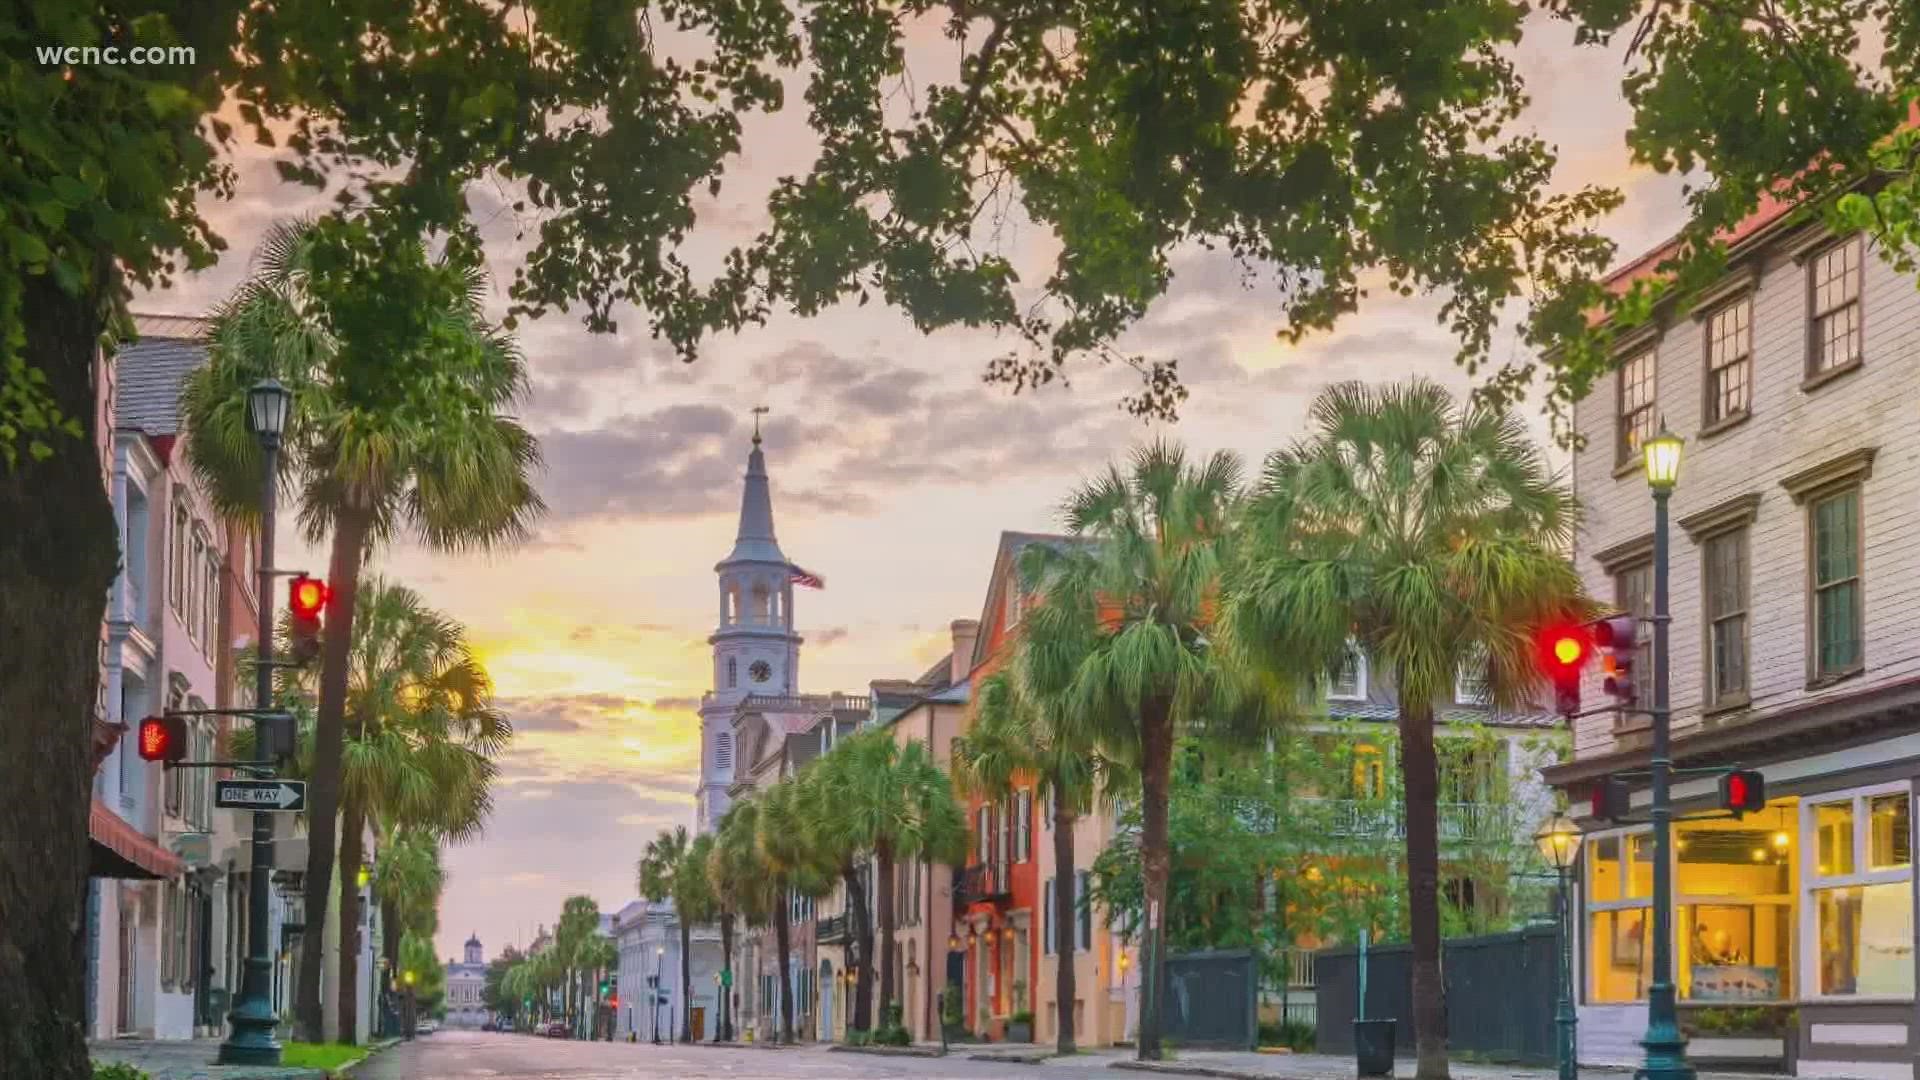 The annual Conde Nast list ranked Charleston number two, noting its southern charm, culture, history and delicious food.